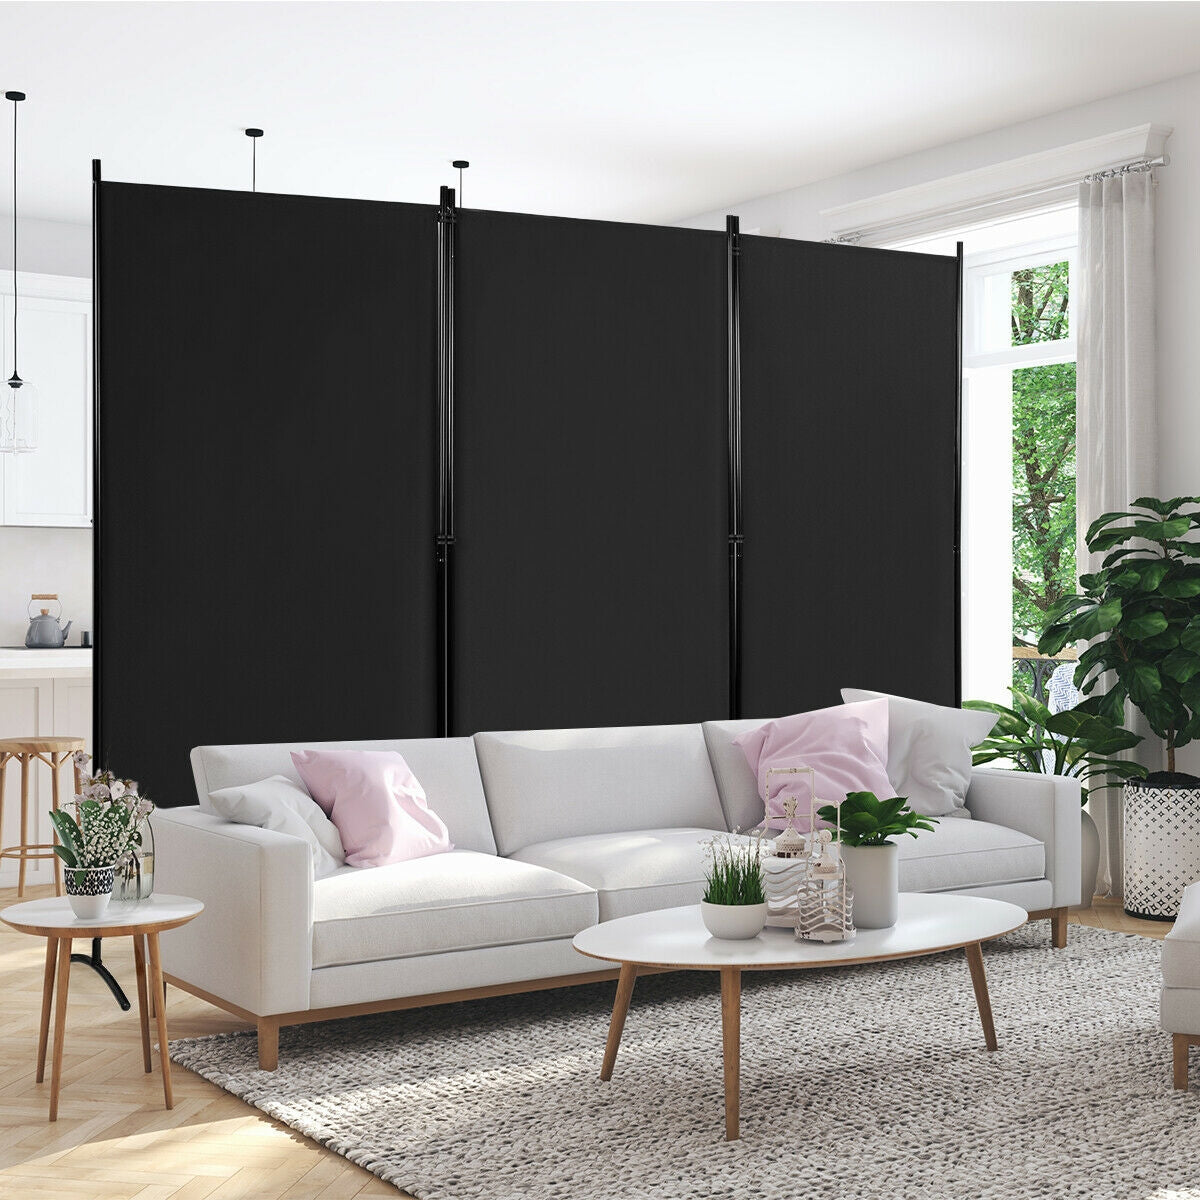 3-Panel Room Divider Folding Privacy Partition Screen for Office Room-Black